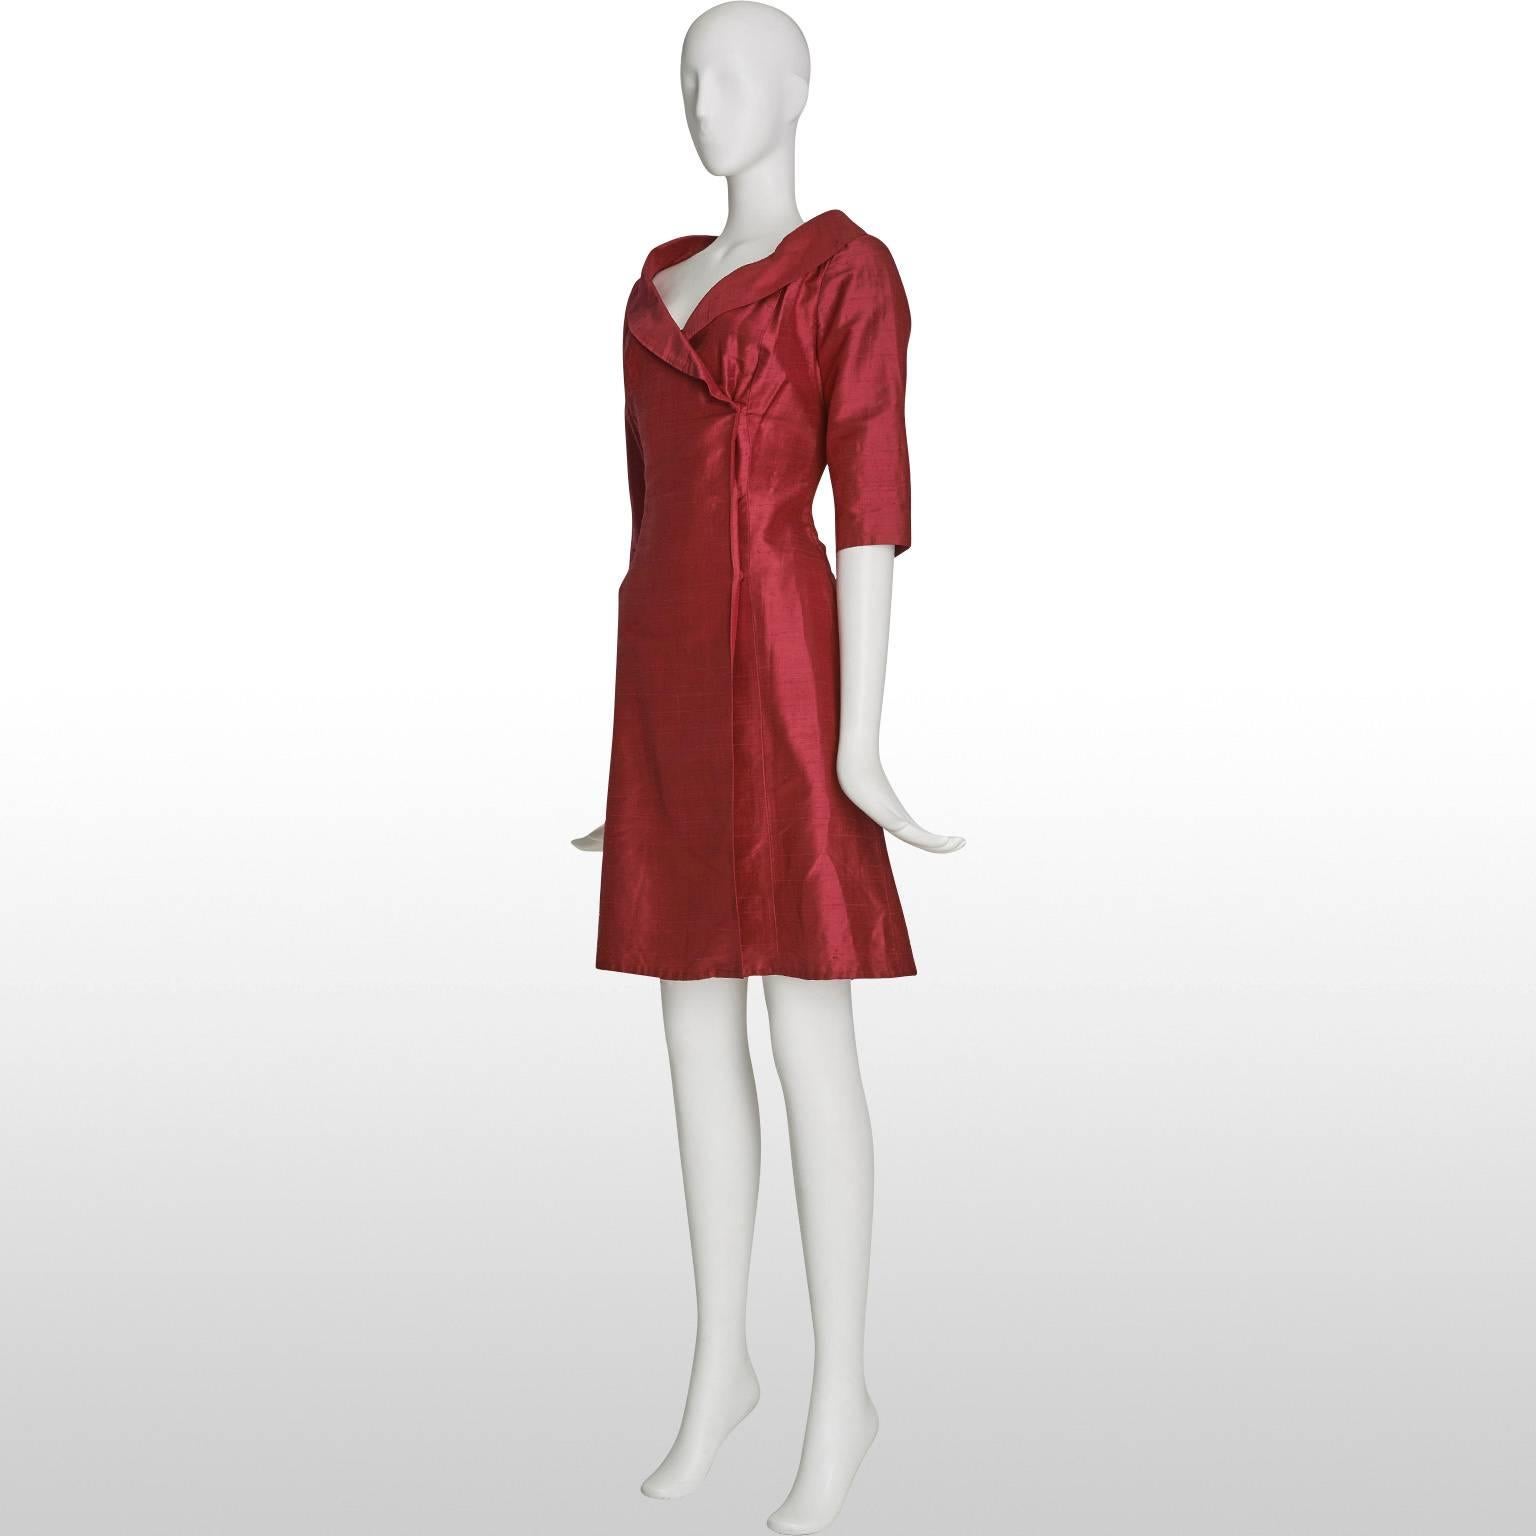 This is a elegant and sophisticated wrap dress from the 60's. The fabric is made out of a claret raw silk. The dress has a wide shawl collar which beautifully displays the neckline of the wearer. The dress remains in excellent condition. 